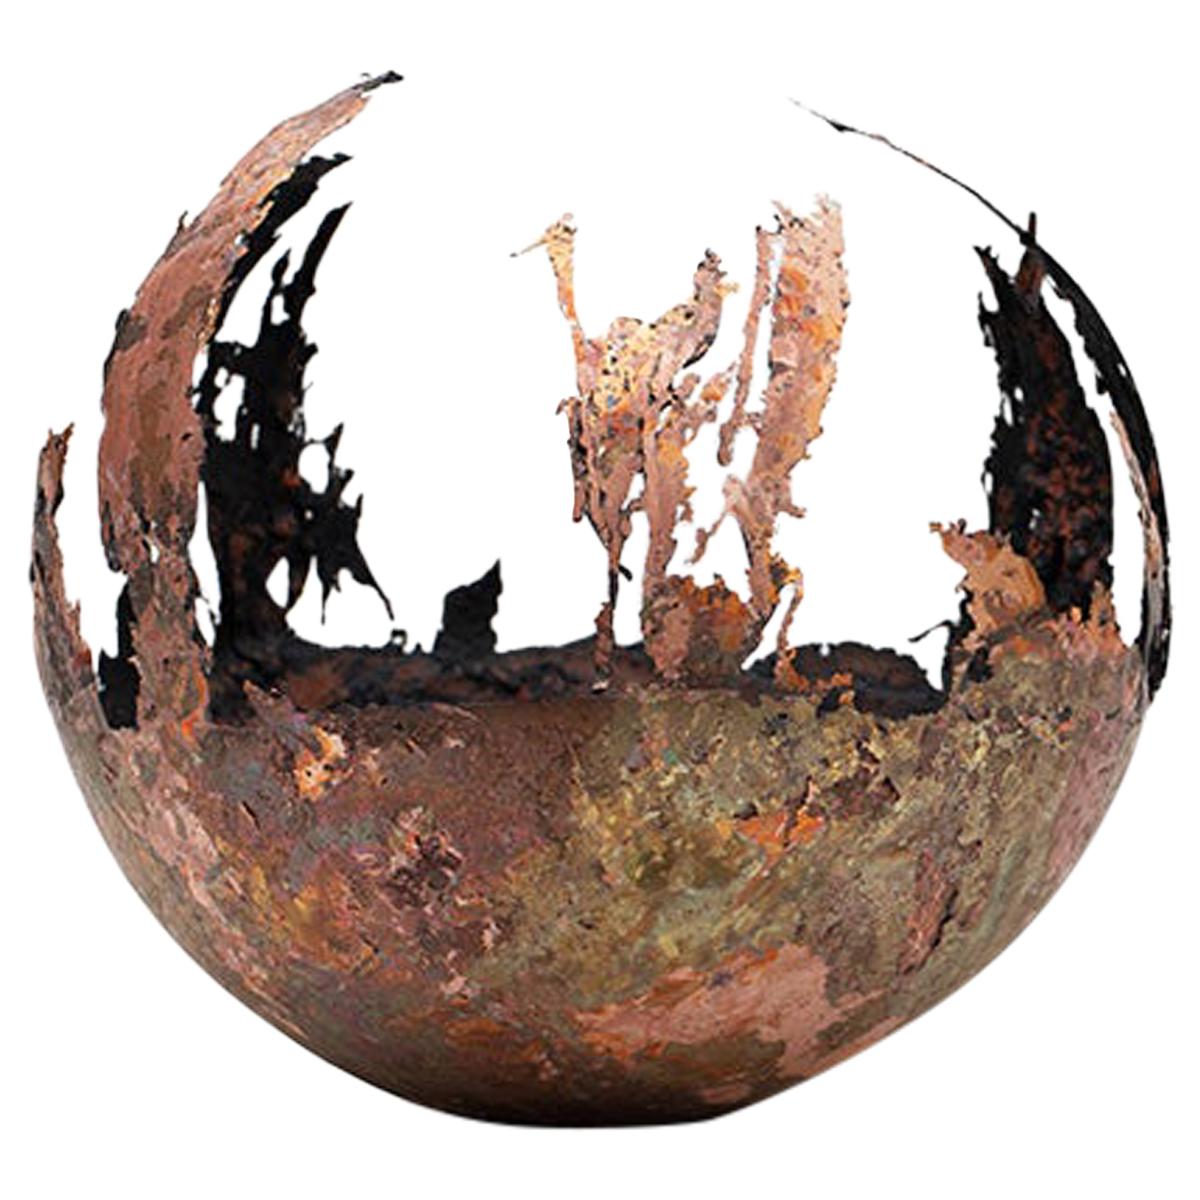 Omer Arbel 113 Series, Unique Vessel N08 in Copper Alloy Casted in Glass